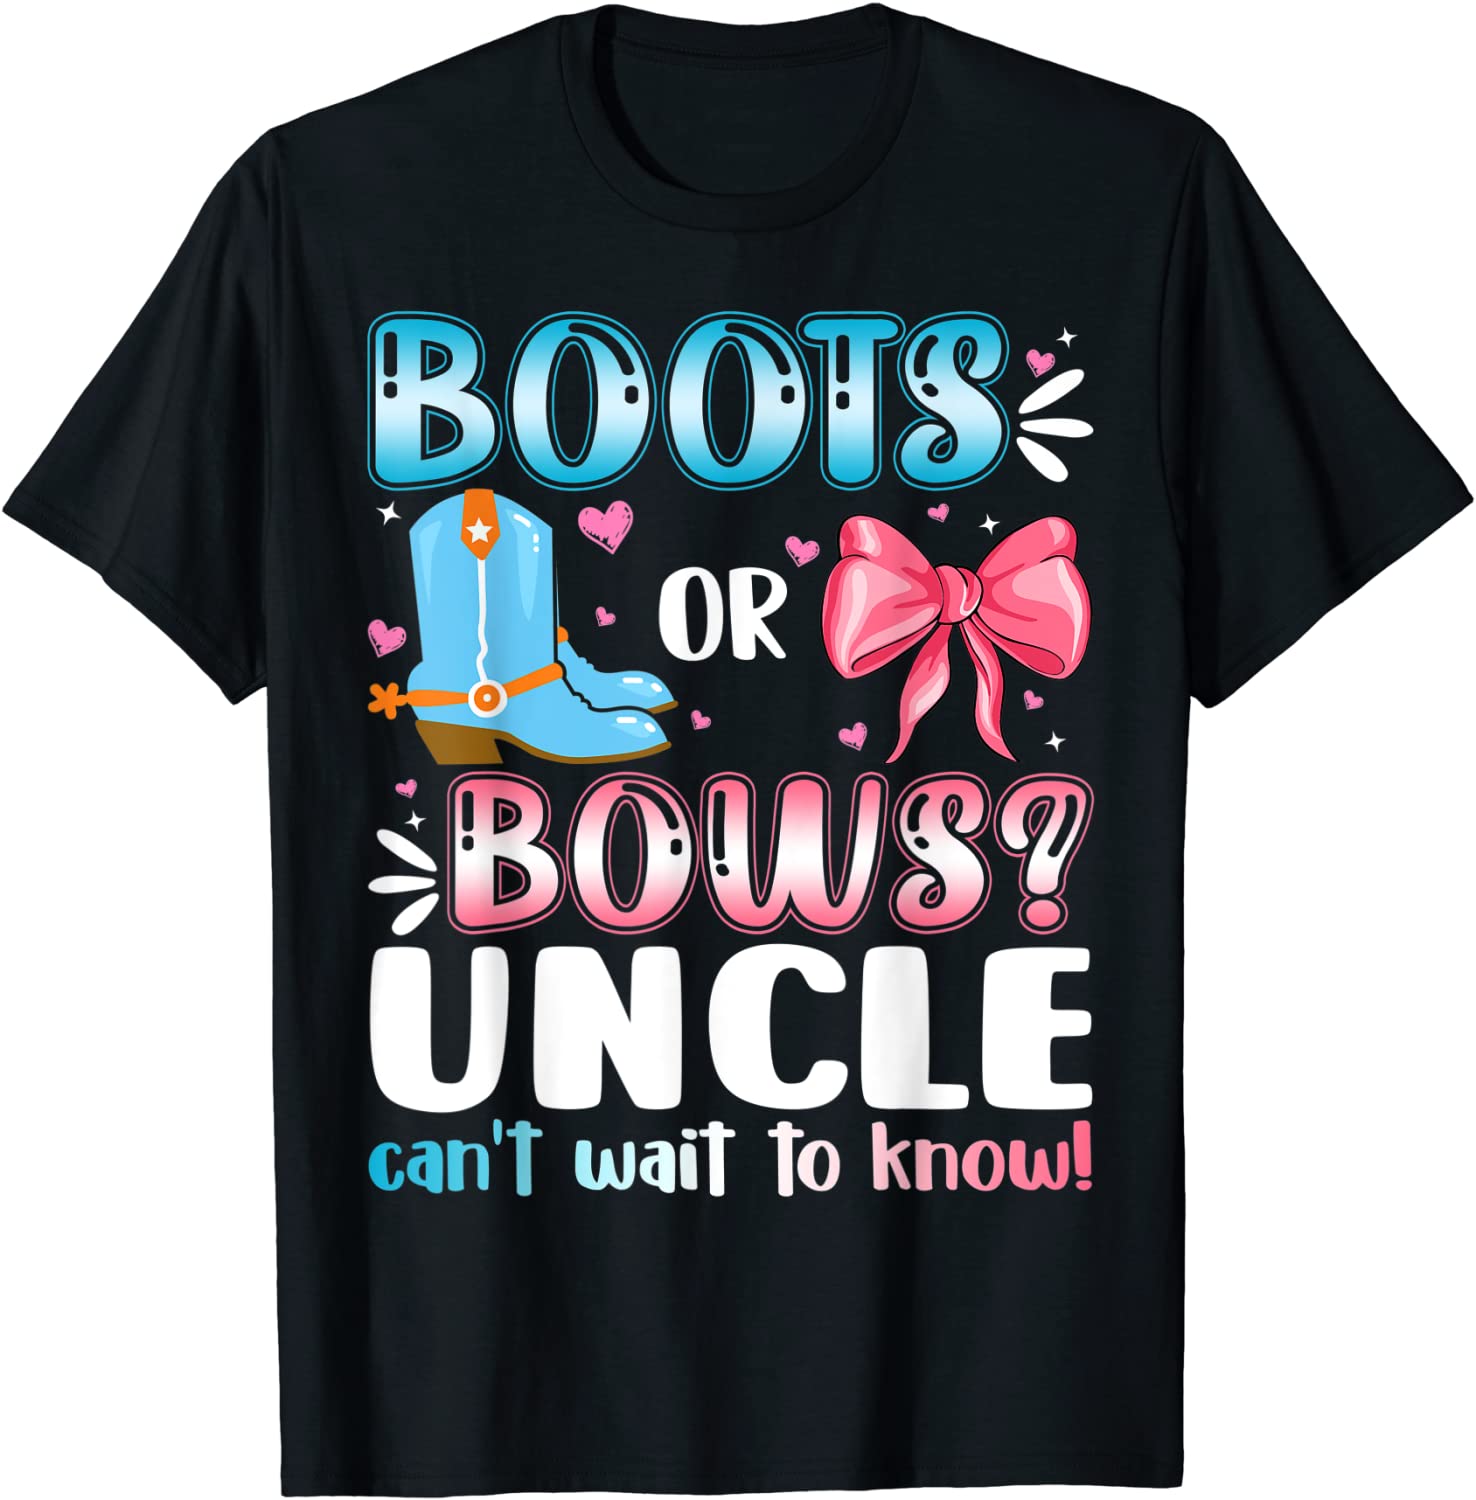 Baby Announcement Shirt Pregnancy Reveal Gender Reveal Shirt Boots or Bows Ready To Know Shirt Gender Reveal Ideas